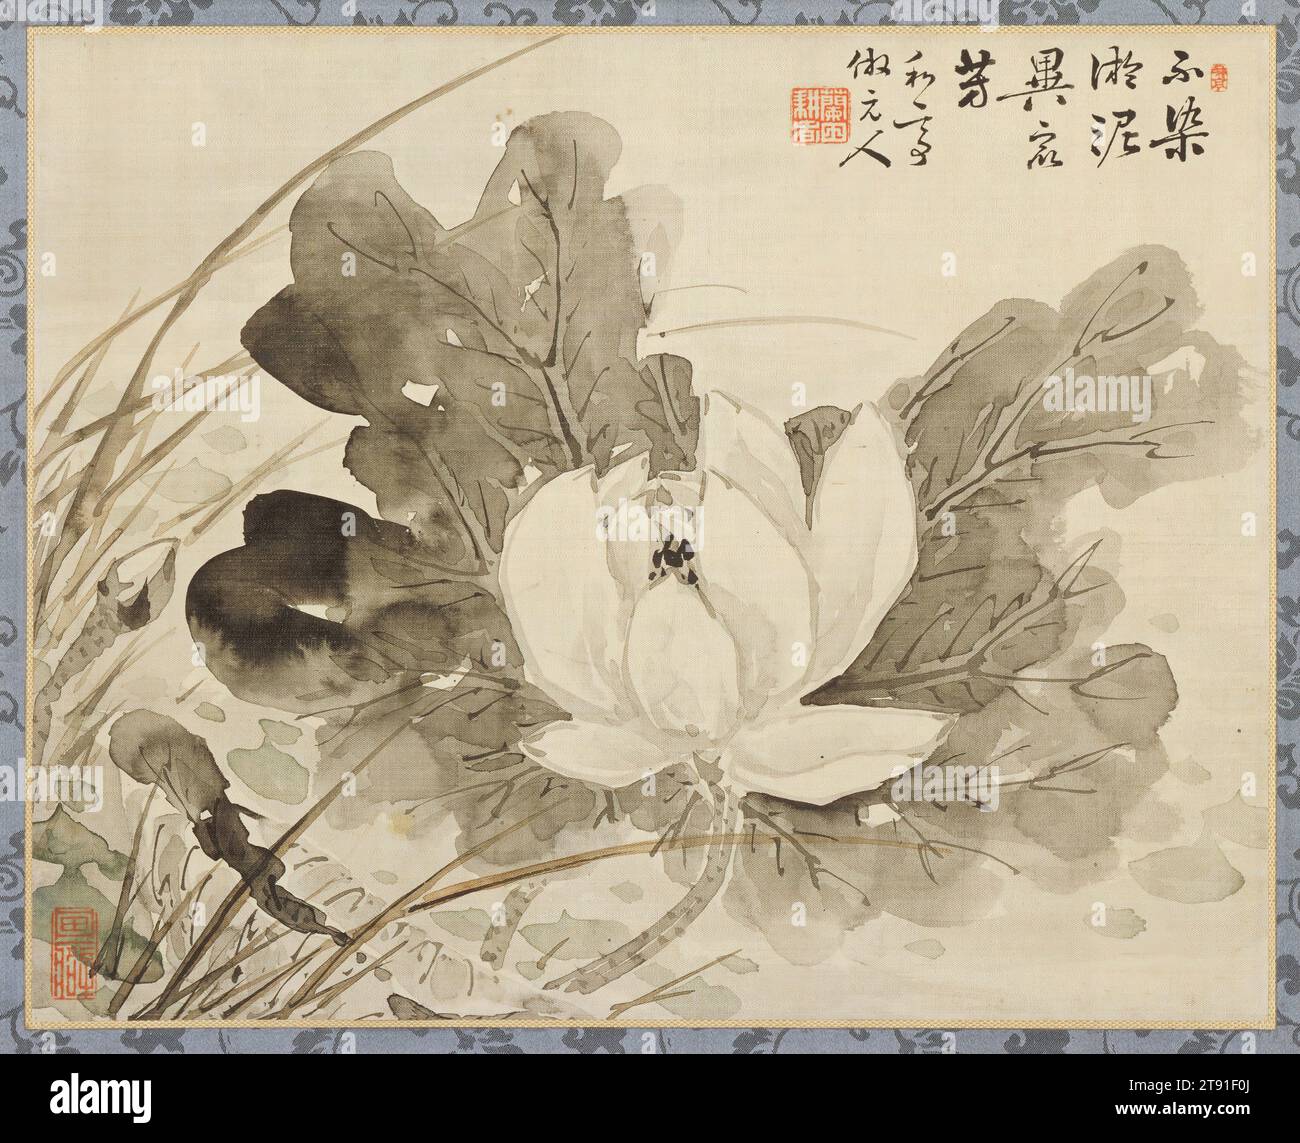 Lotus in Bloom, 19th century, Taki Katei, Japanese, 1830 - 1901, 10 1/16 x 12 7/16 in. (25.56 x 31.59 cm) (image), Ink on satin, Japan, 19th century, Taki Katei specialized in Chinese literati style painting which he learned from Japanese masters Araki Kankai and O oka Umpo  but, also from Chinese scholar painters living in Nagasaki. The small scale of this painting, its seasonal and symbolic theme make it appropriate for use in the tea ceremony. The lotus has long been a Buddhist emblem, representing the perfection and 'flowering' of the Buddha's teachings. Stock Photo